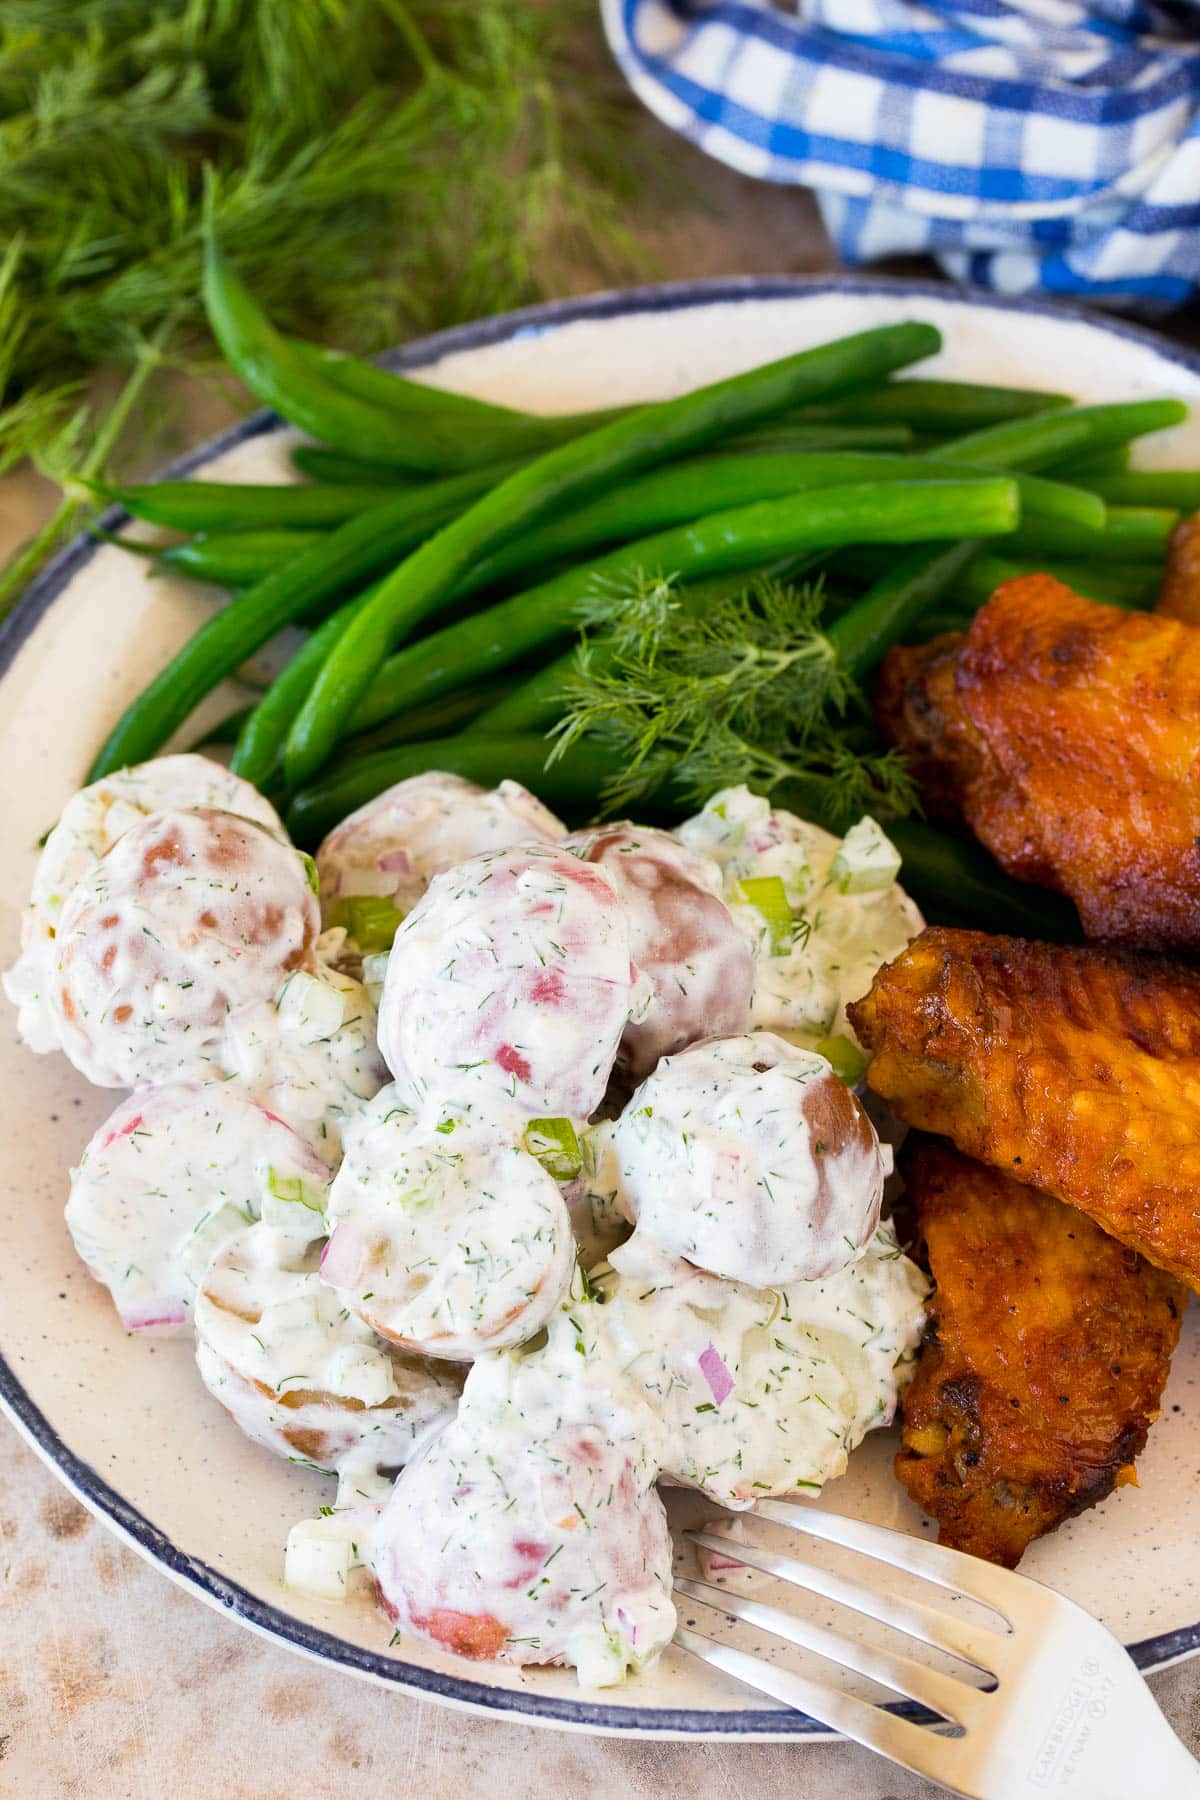 Dill potato salad served with chicken wings and green beans.